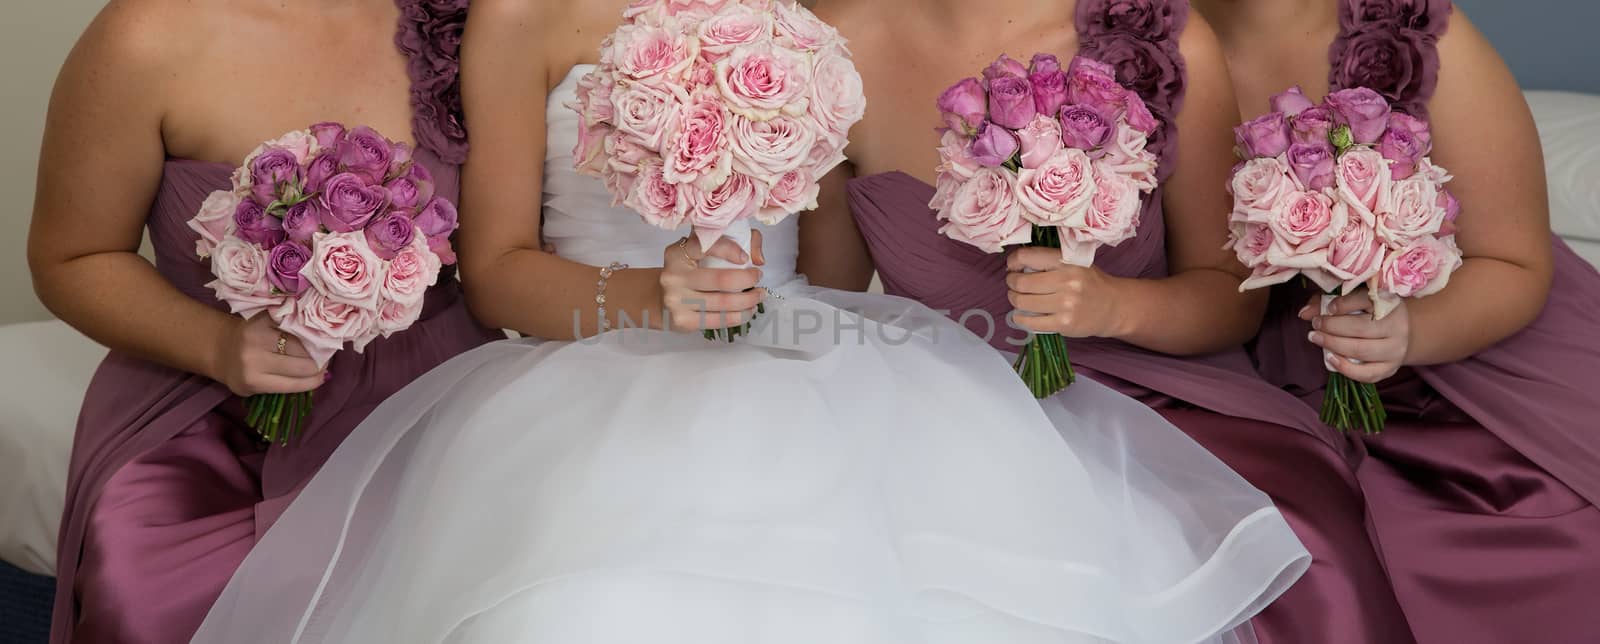 A bride with her bridesmaids all holding their bouquets and posing prior to the wedding ceremony